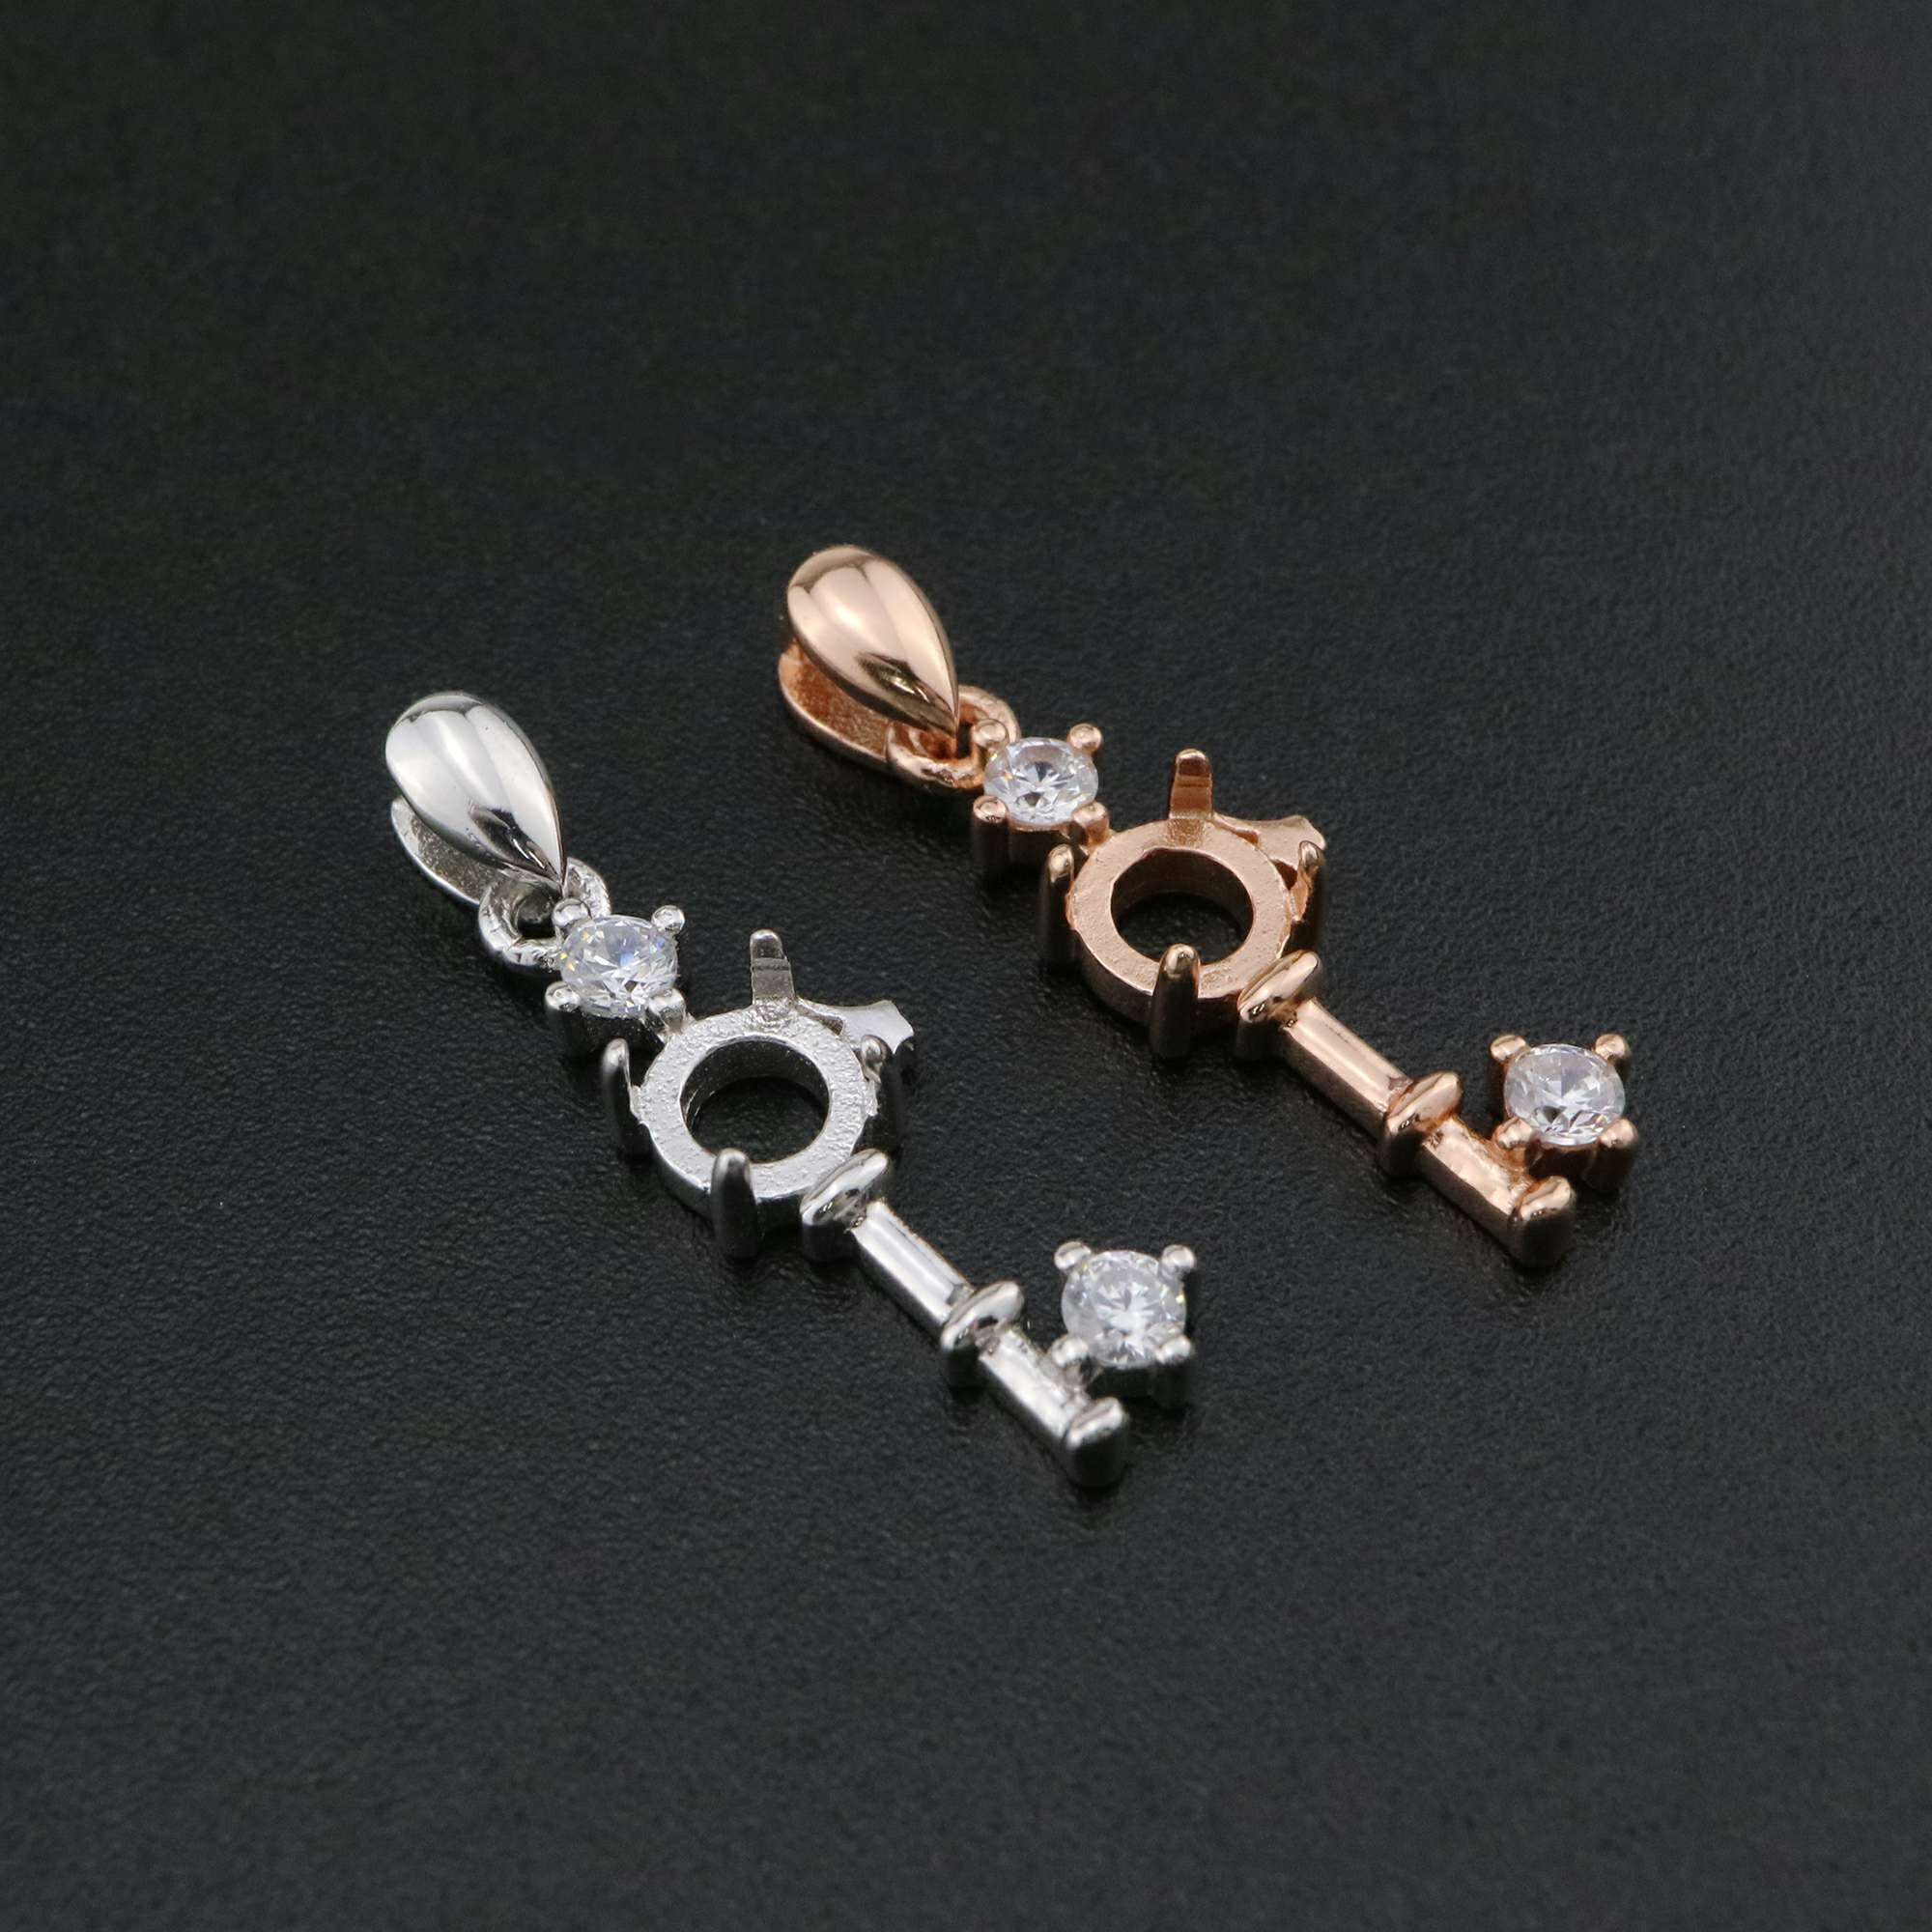 1Pcs 5MM Key Round Prong Pendant Settings Rose Gold Plated Solid 925 Sterling Silver Cabochon Charm Bezel Tray DIY Supplies 1411262 - Click Image to Close